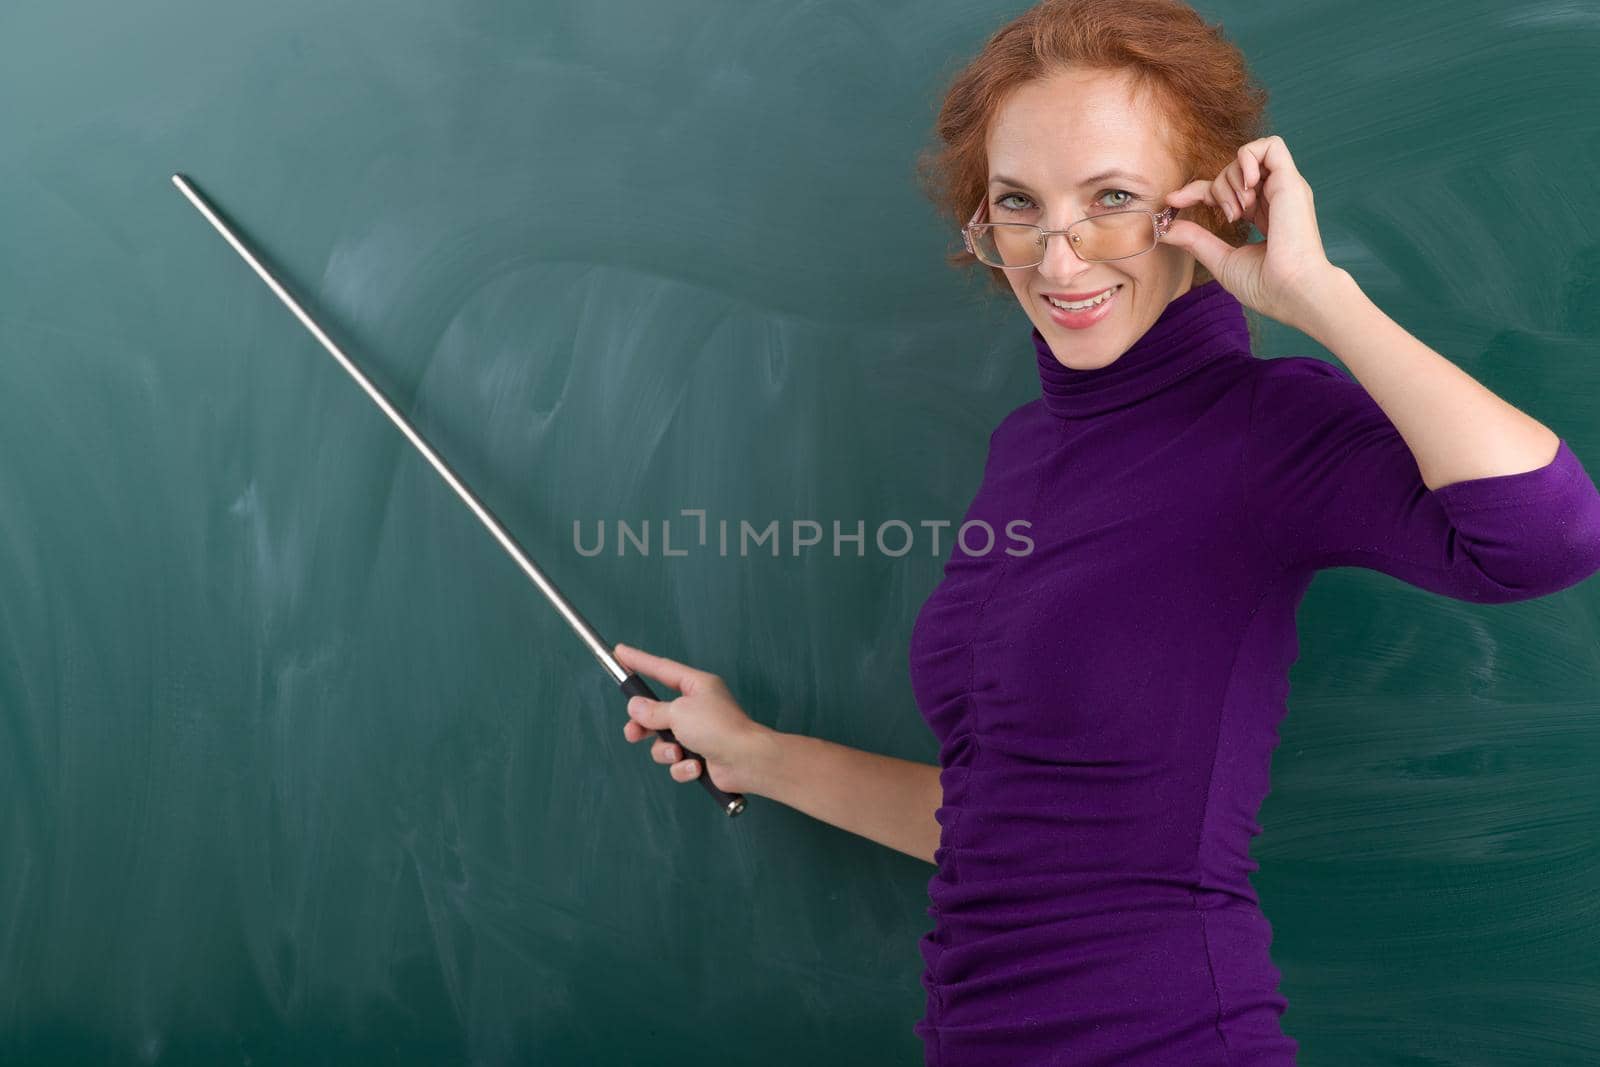 Teacher standing at blackboard with pointer. Portrait of smiling young woman looking over glasses. Teacher posing at green chalkboard and pointing at it